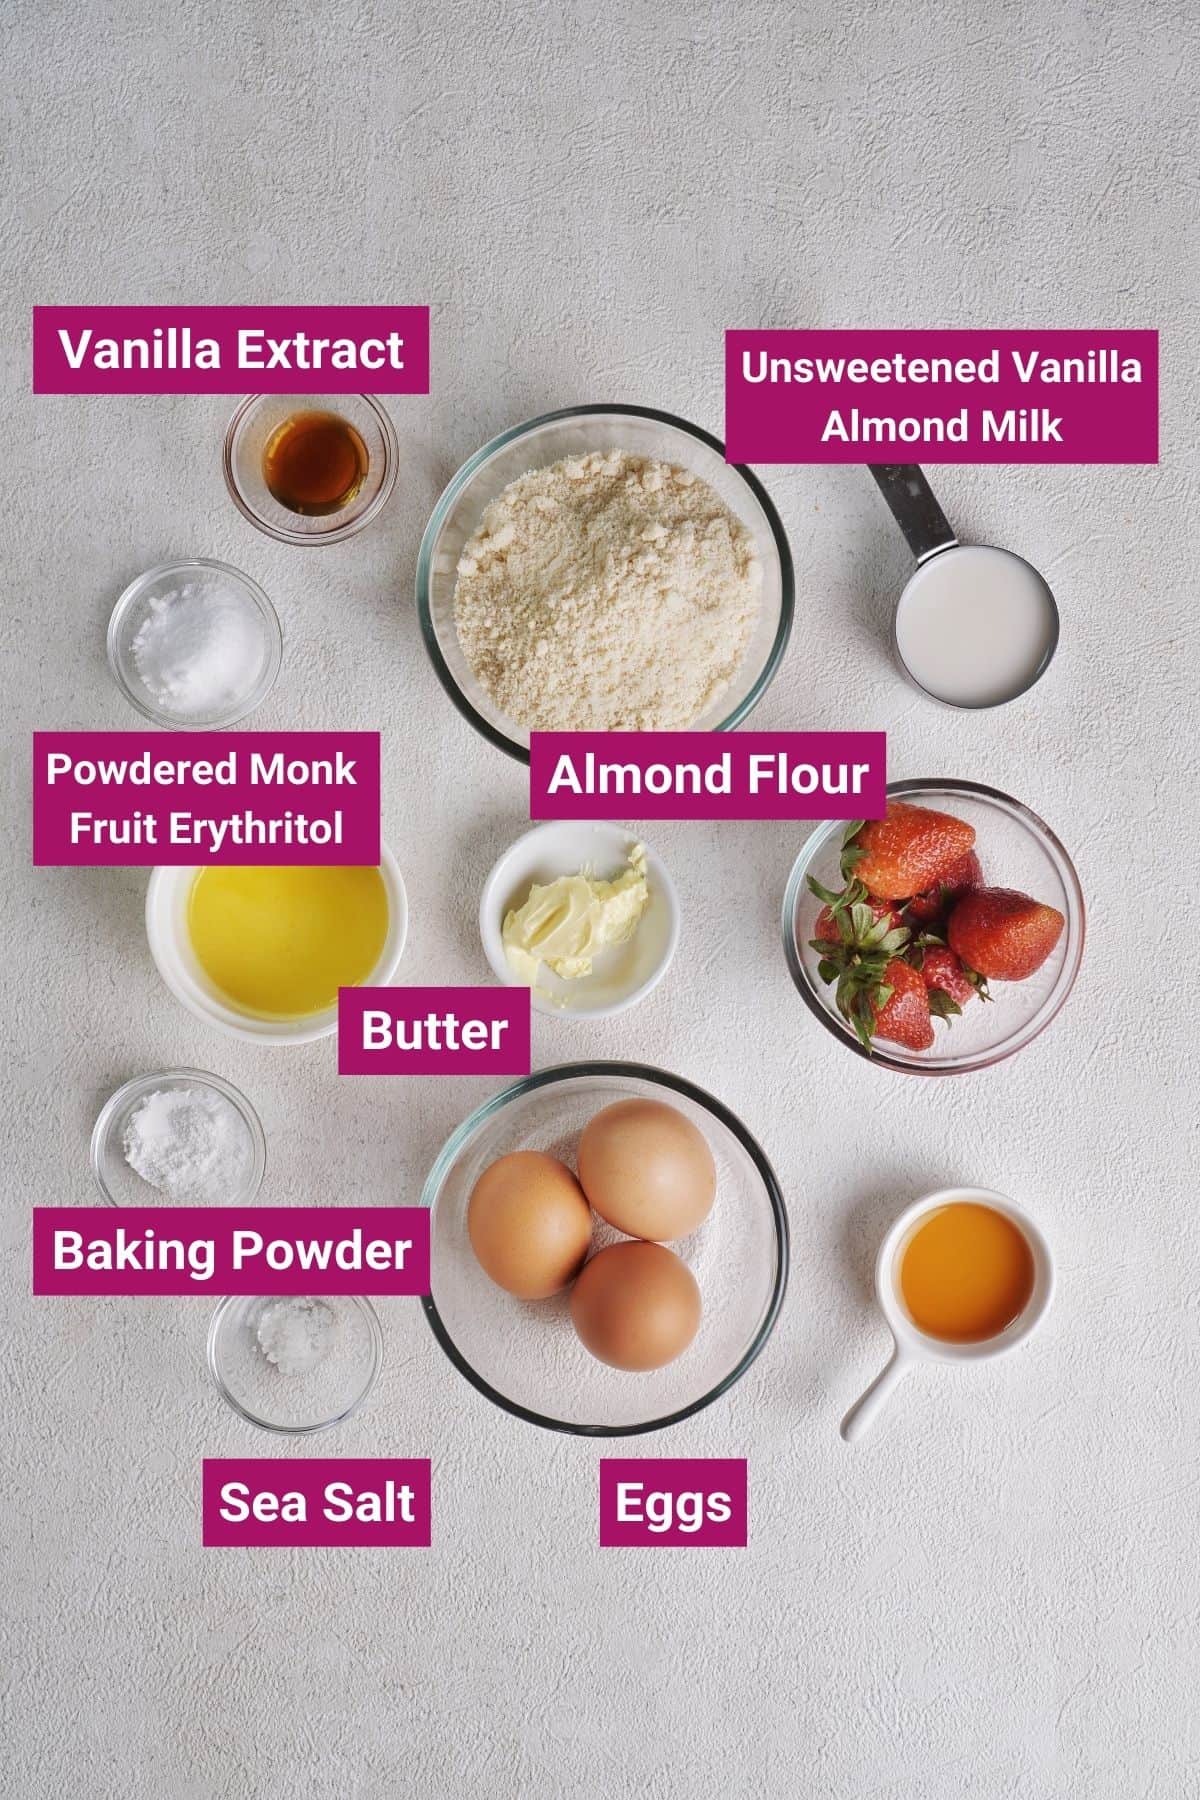 Overhead view of the labeled ingredients needed for keto pancakes: a measuring cup of unsweetened vanilla almond milk, a bowl of almond flour, a bowl of vanilla extract, a bowl of powdered monk fruit erythritol, a bowl of butter, a bowl of baking powder, a bowl of sea salt, and a bowl of eggs, next to a bowl of strawberries and some maple syrup. 